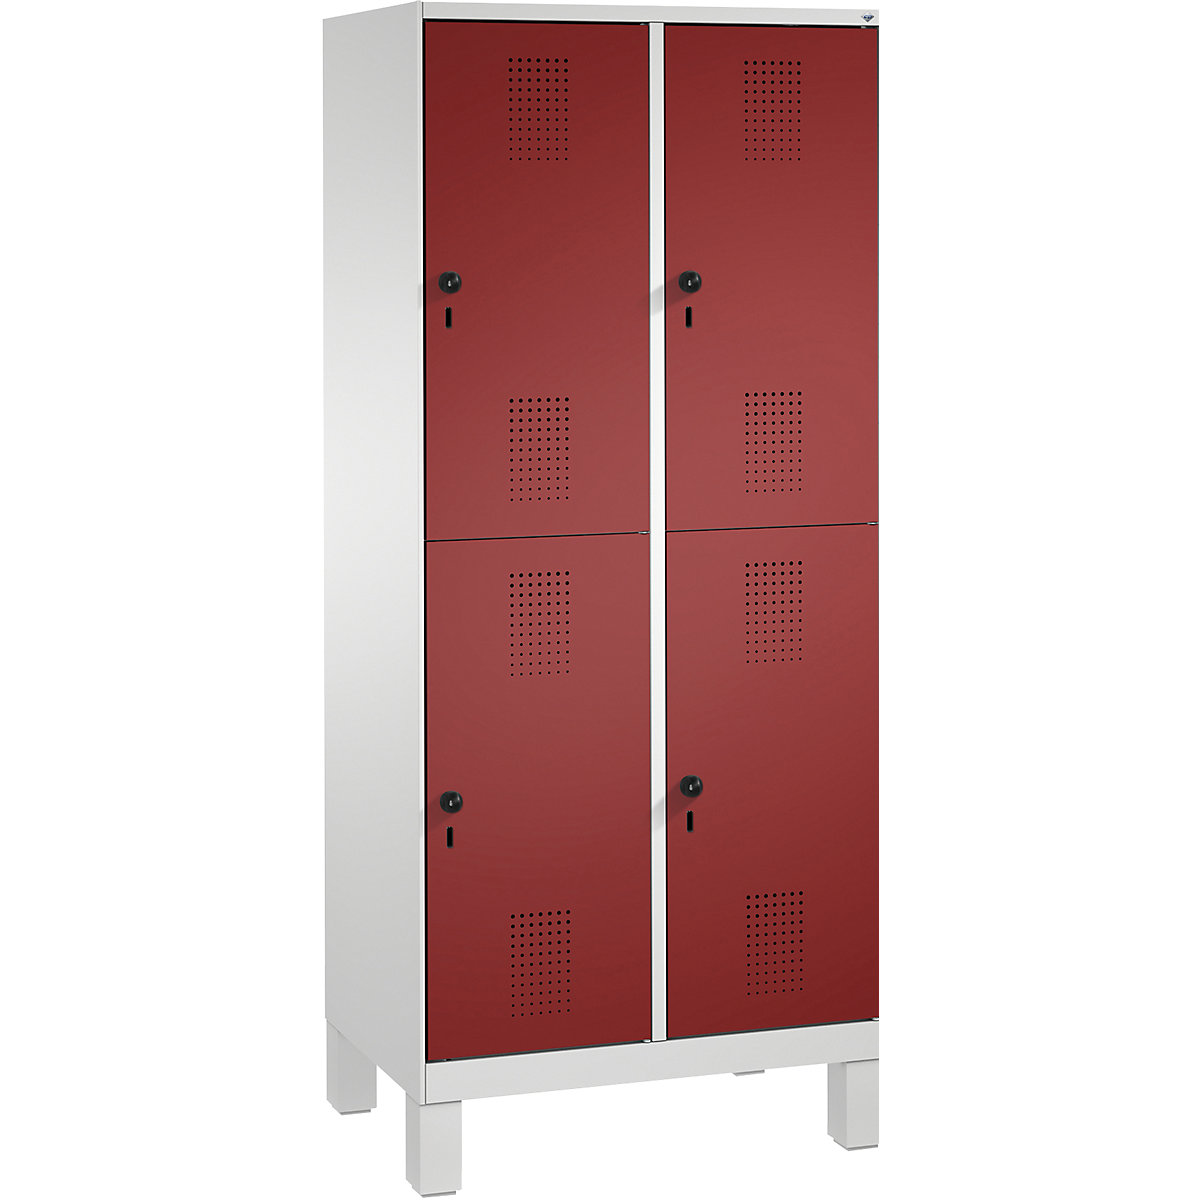 EVOLO cloakroom locker, double tier, with feet – C+P, 2 compartments, 2 shelf compartments each, compartment width 400 mm, light grey / ruby red-17